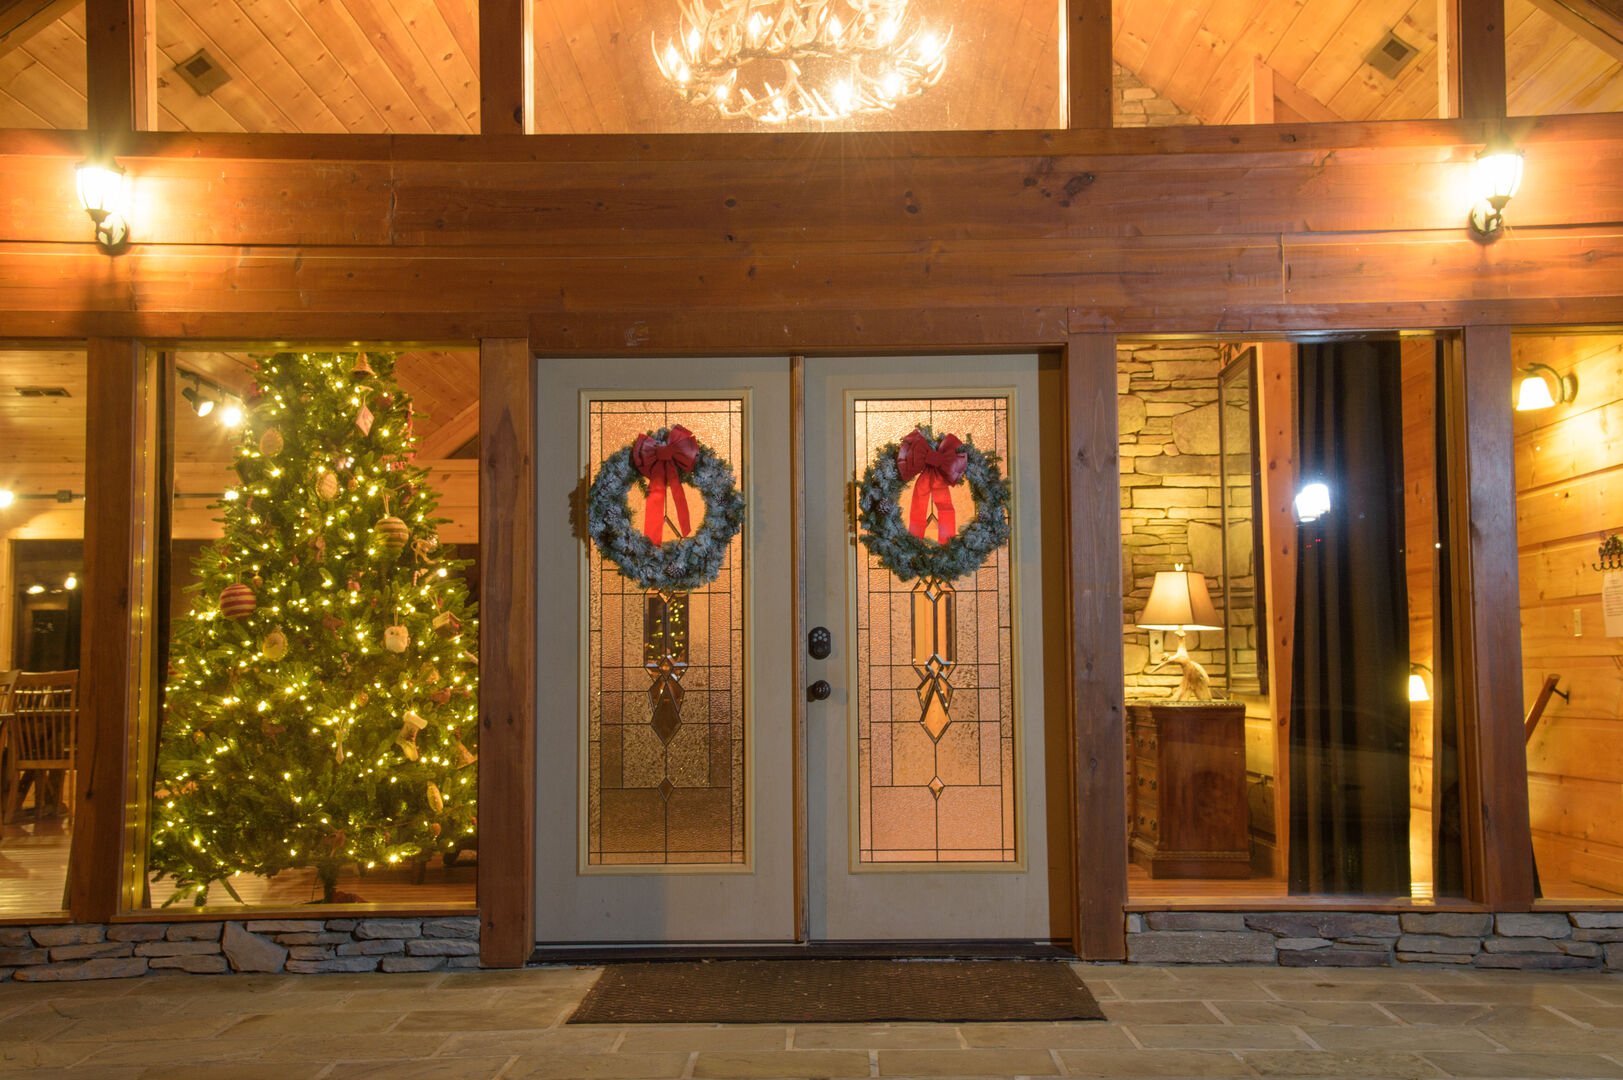 Image of Front Doors Decorated for the Holidays.